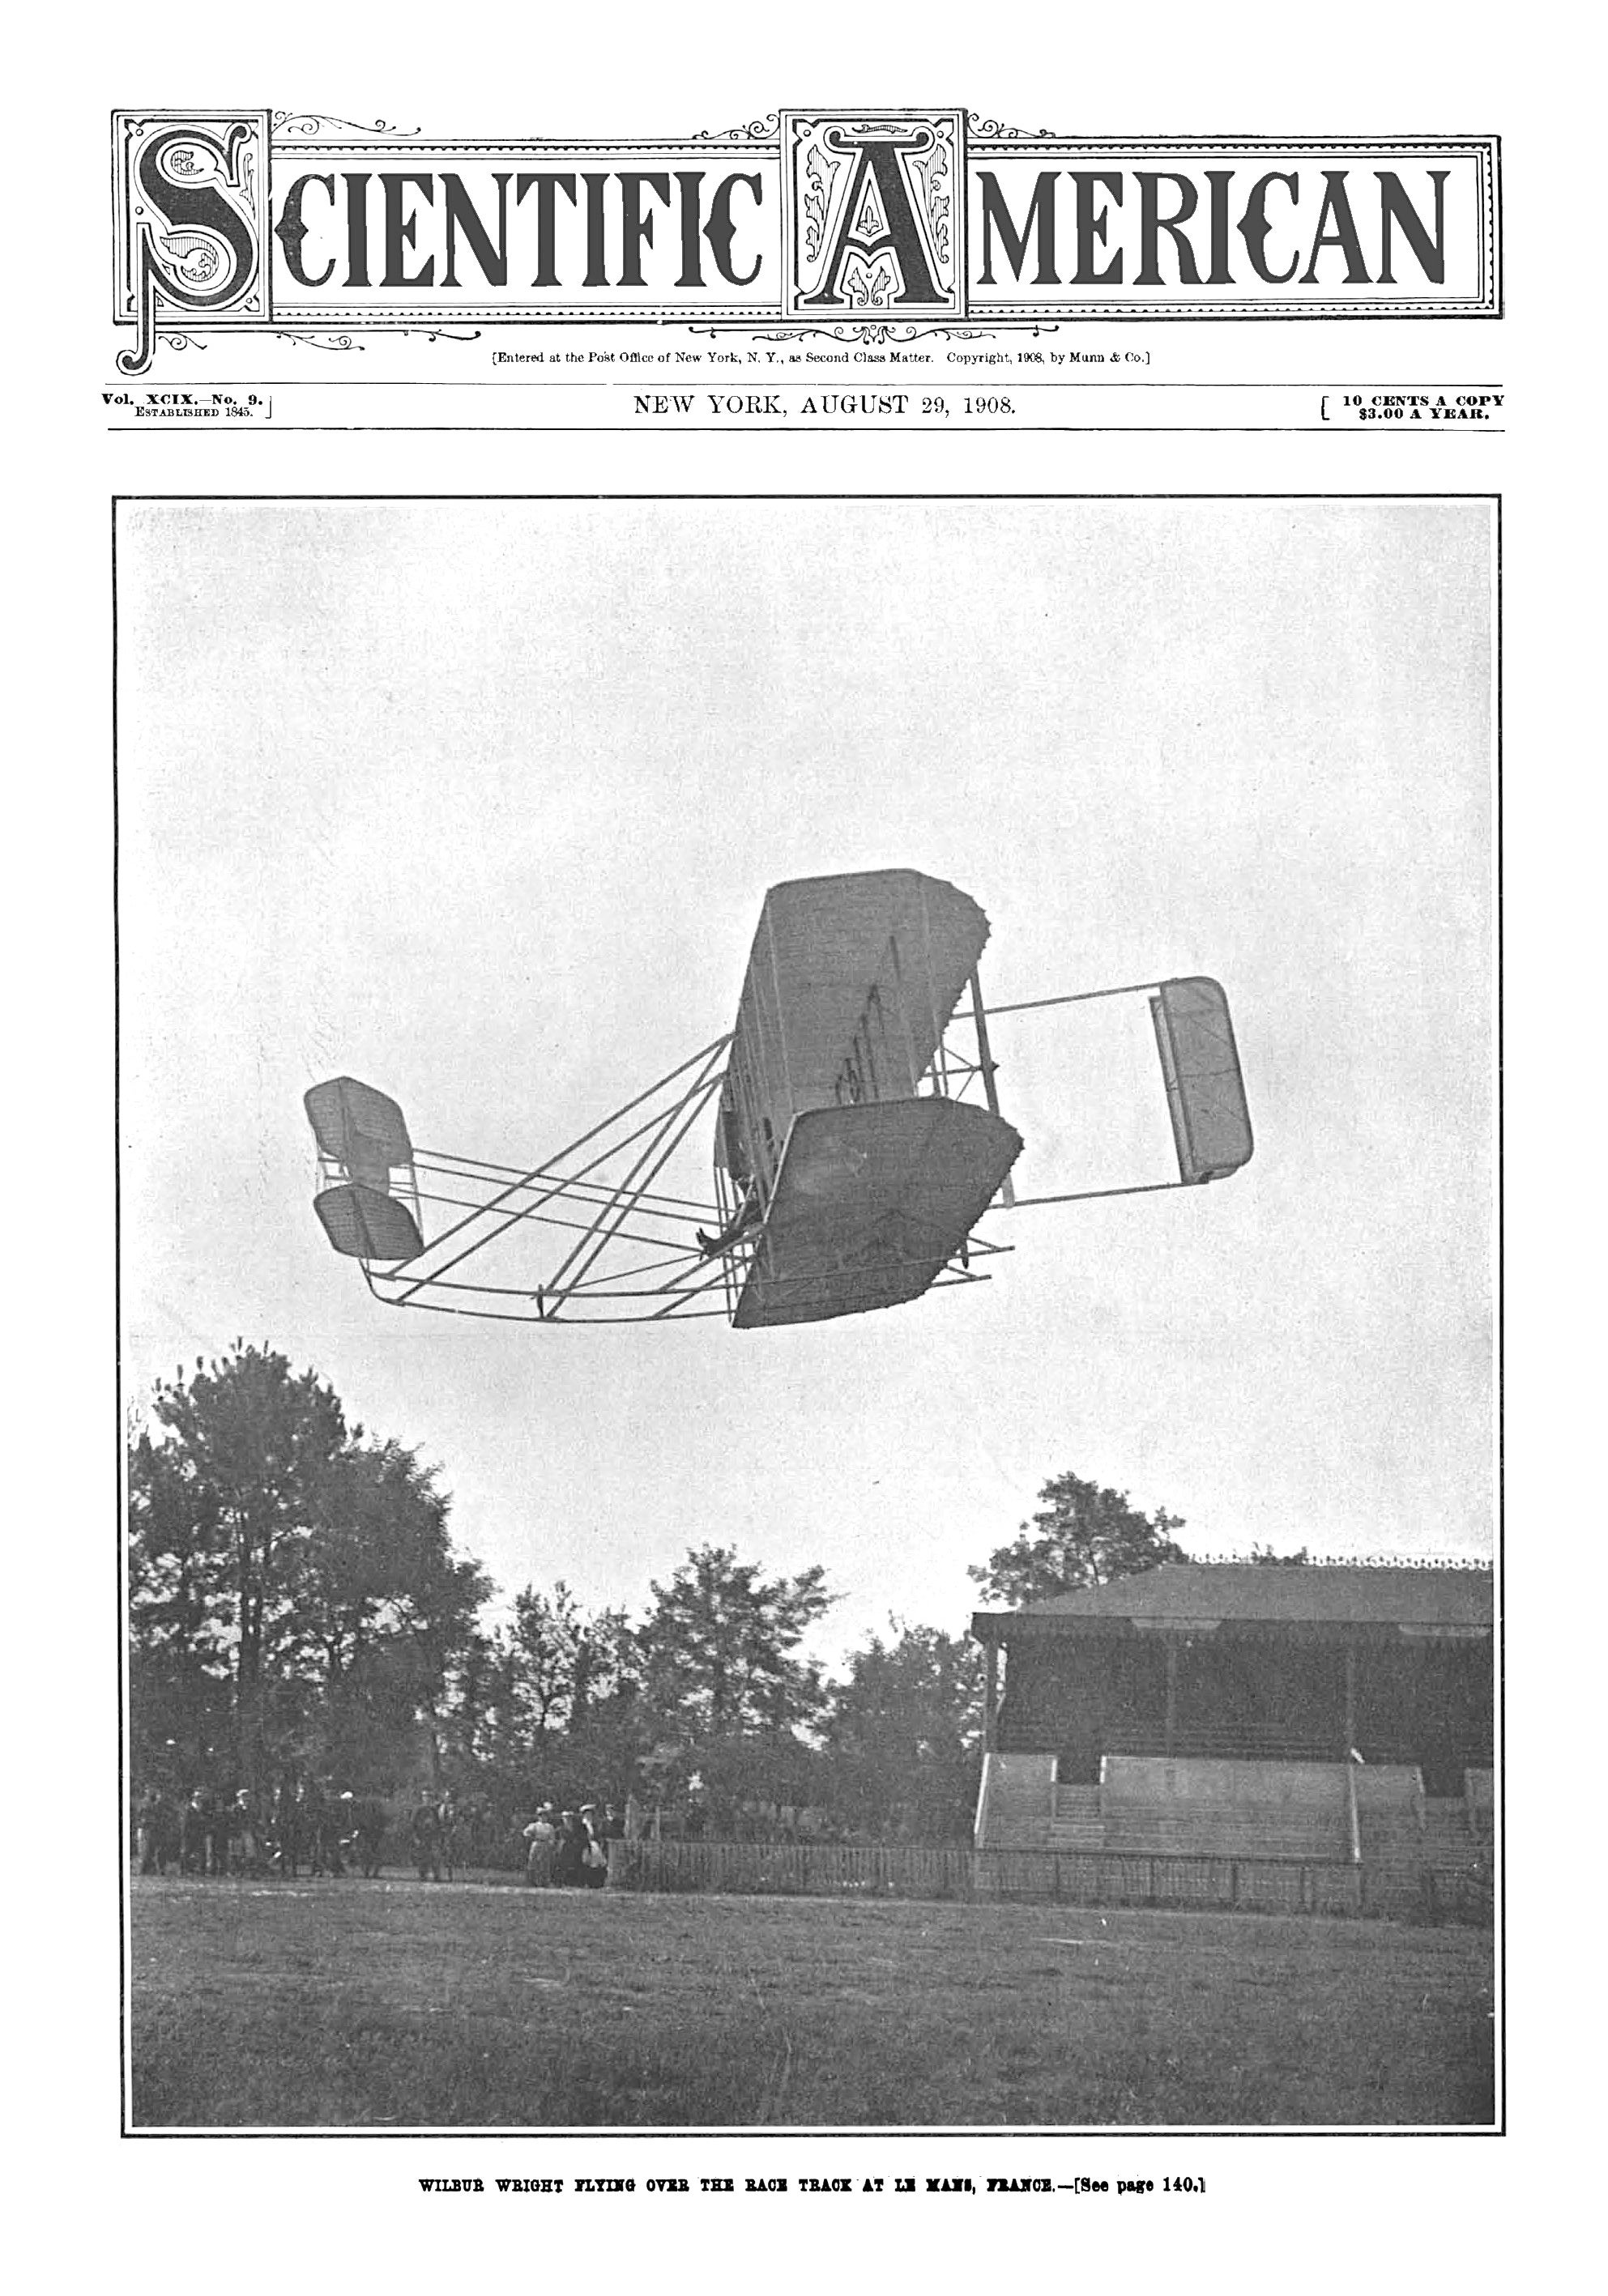 Wilbur Wright demonstrates the Wright's mastery of the airplane in August 1908.